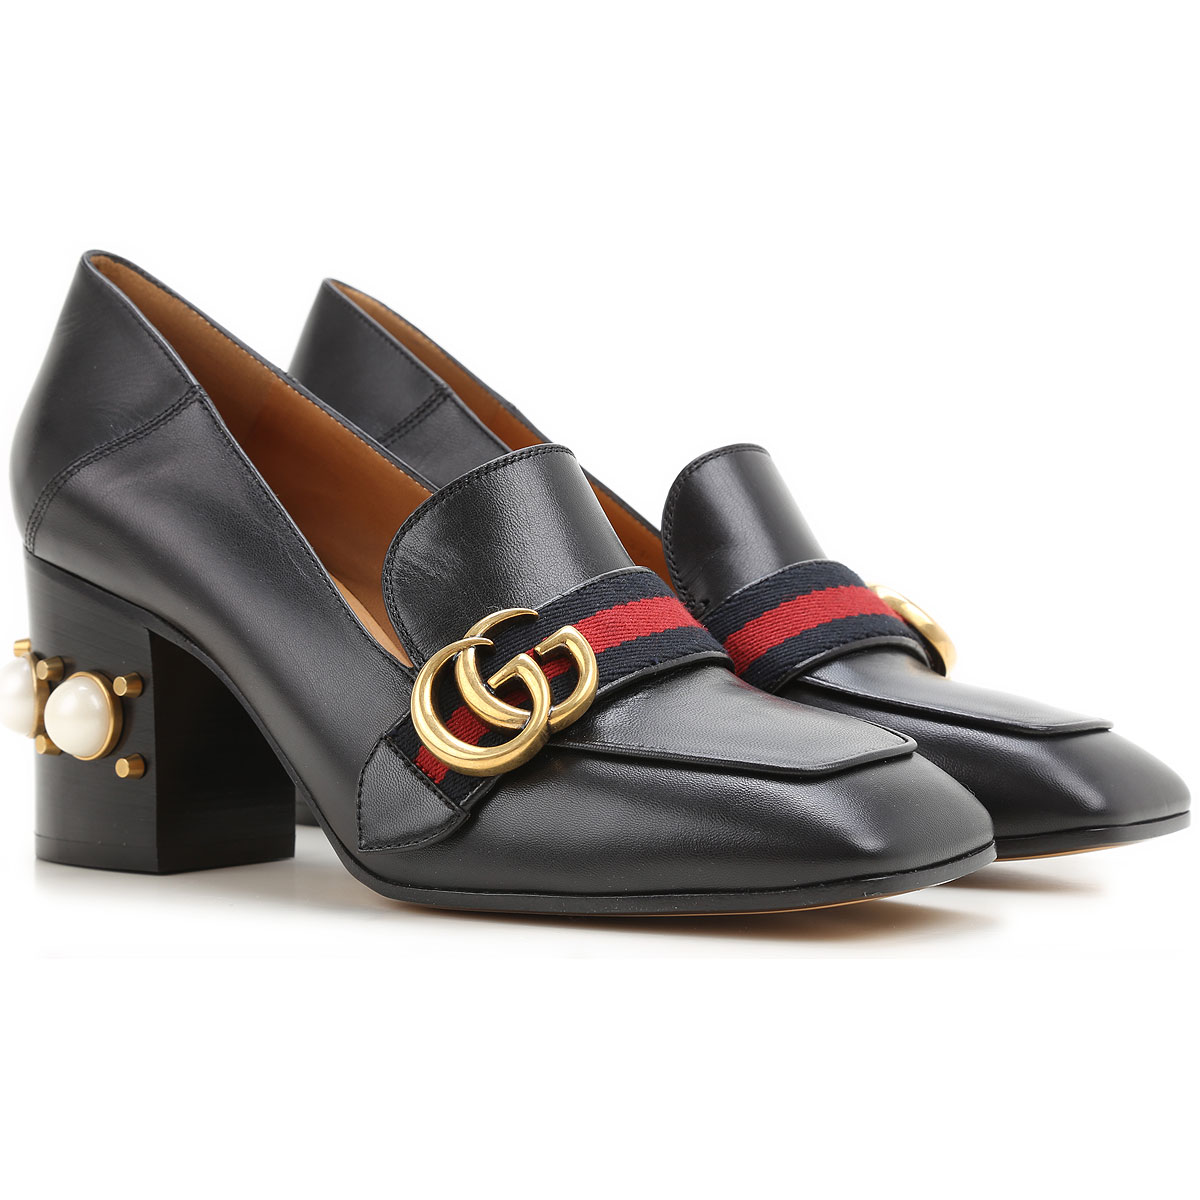 Womens Shoes Gucci, Style code: 425943-cqxm0-1061